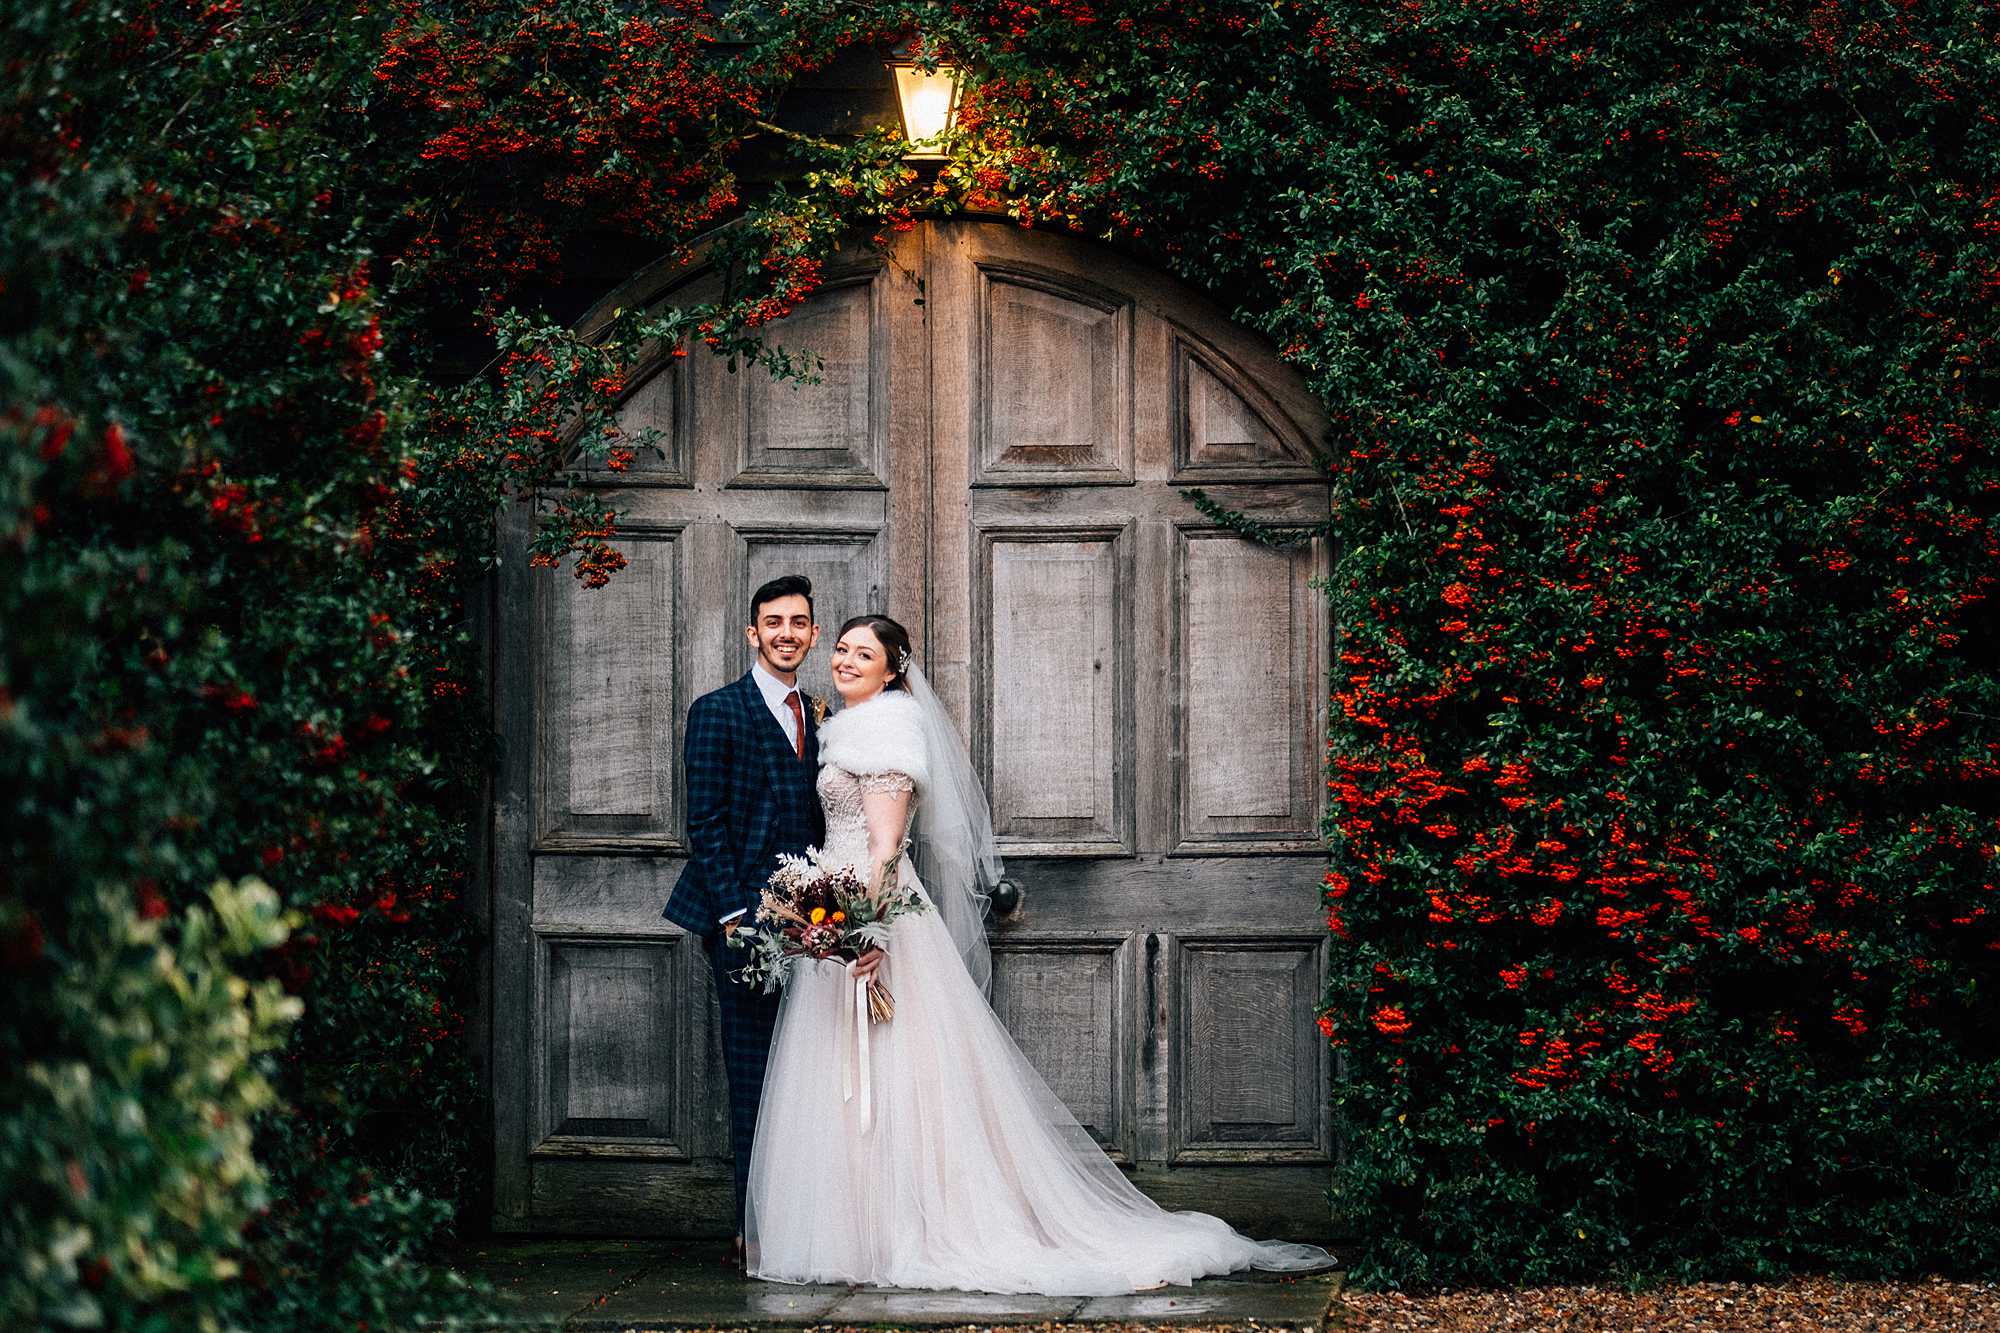 Intimate Christmas wedding at Winters Barns with Robyn and Jake. A stunning and festive wedding, surrounded by their closest family and friends.